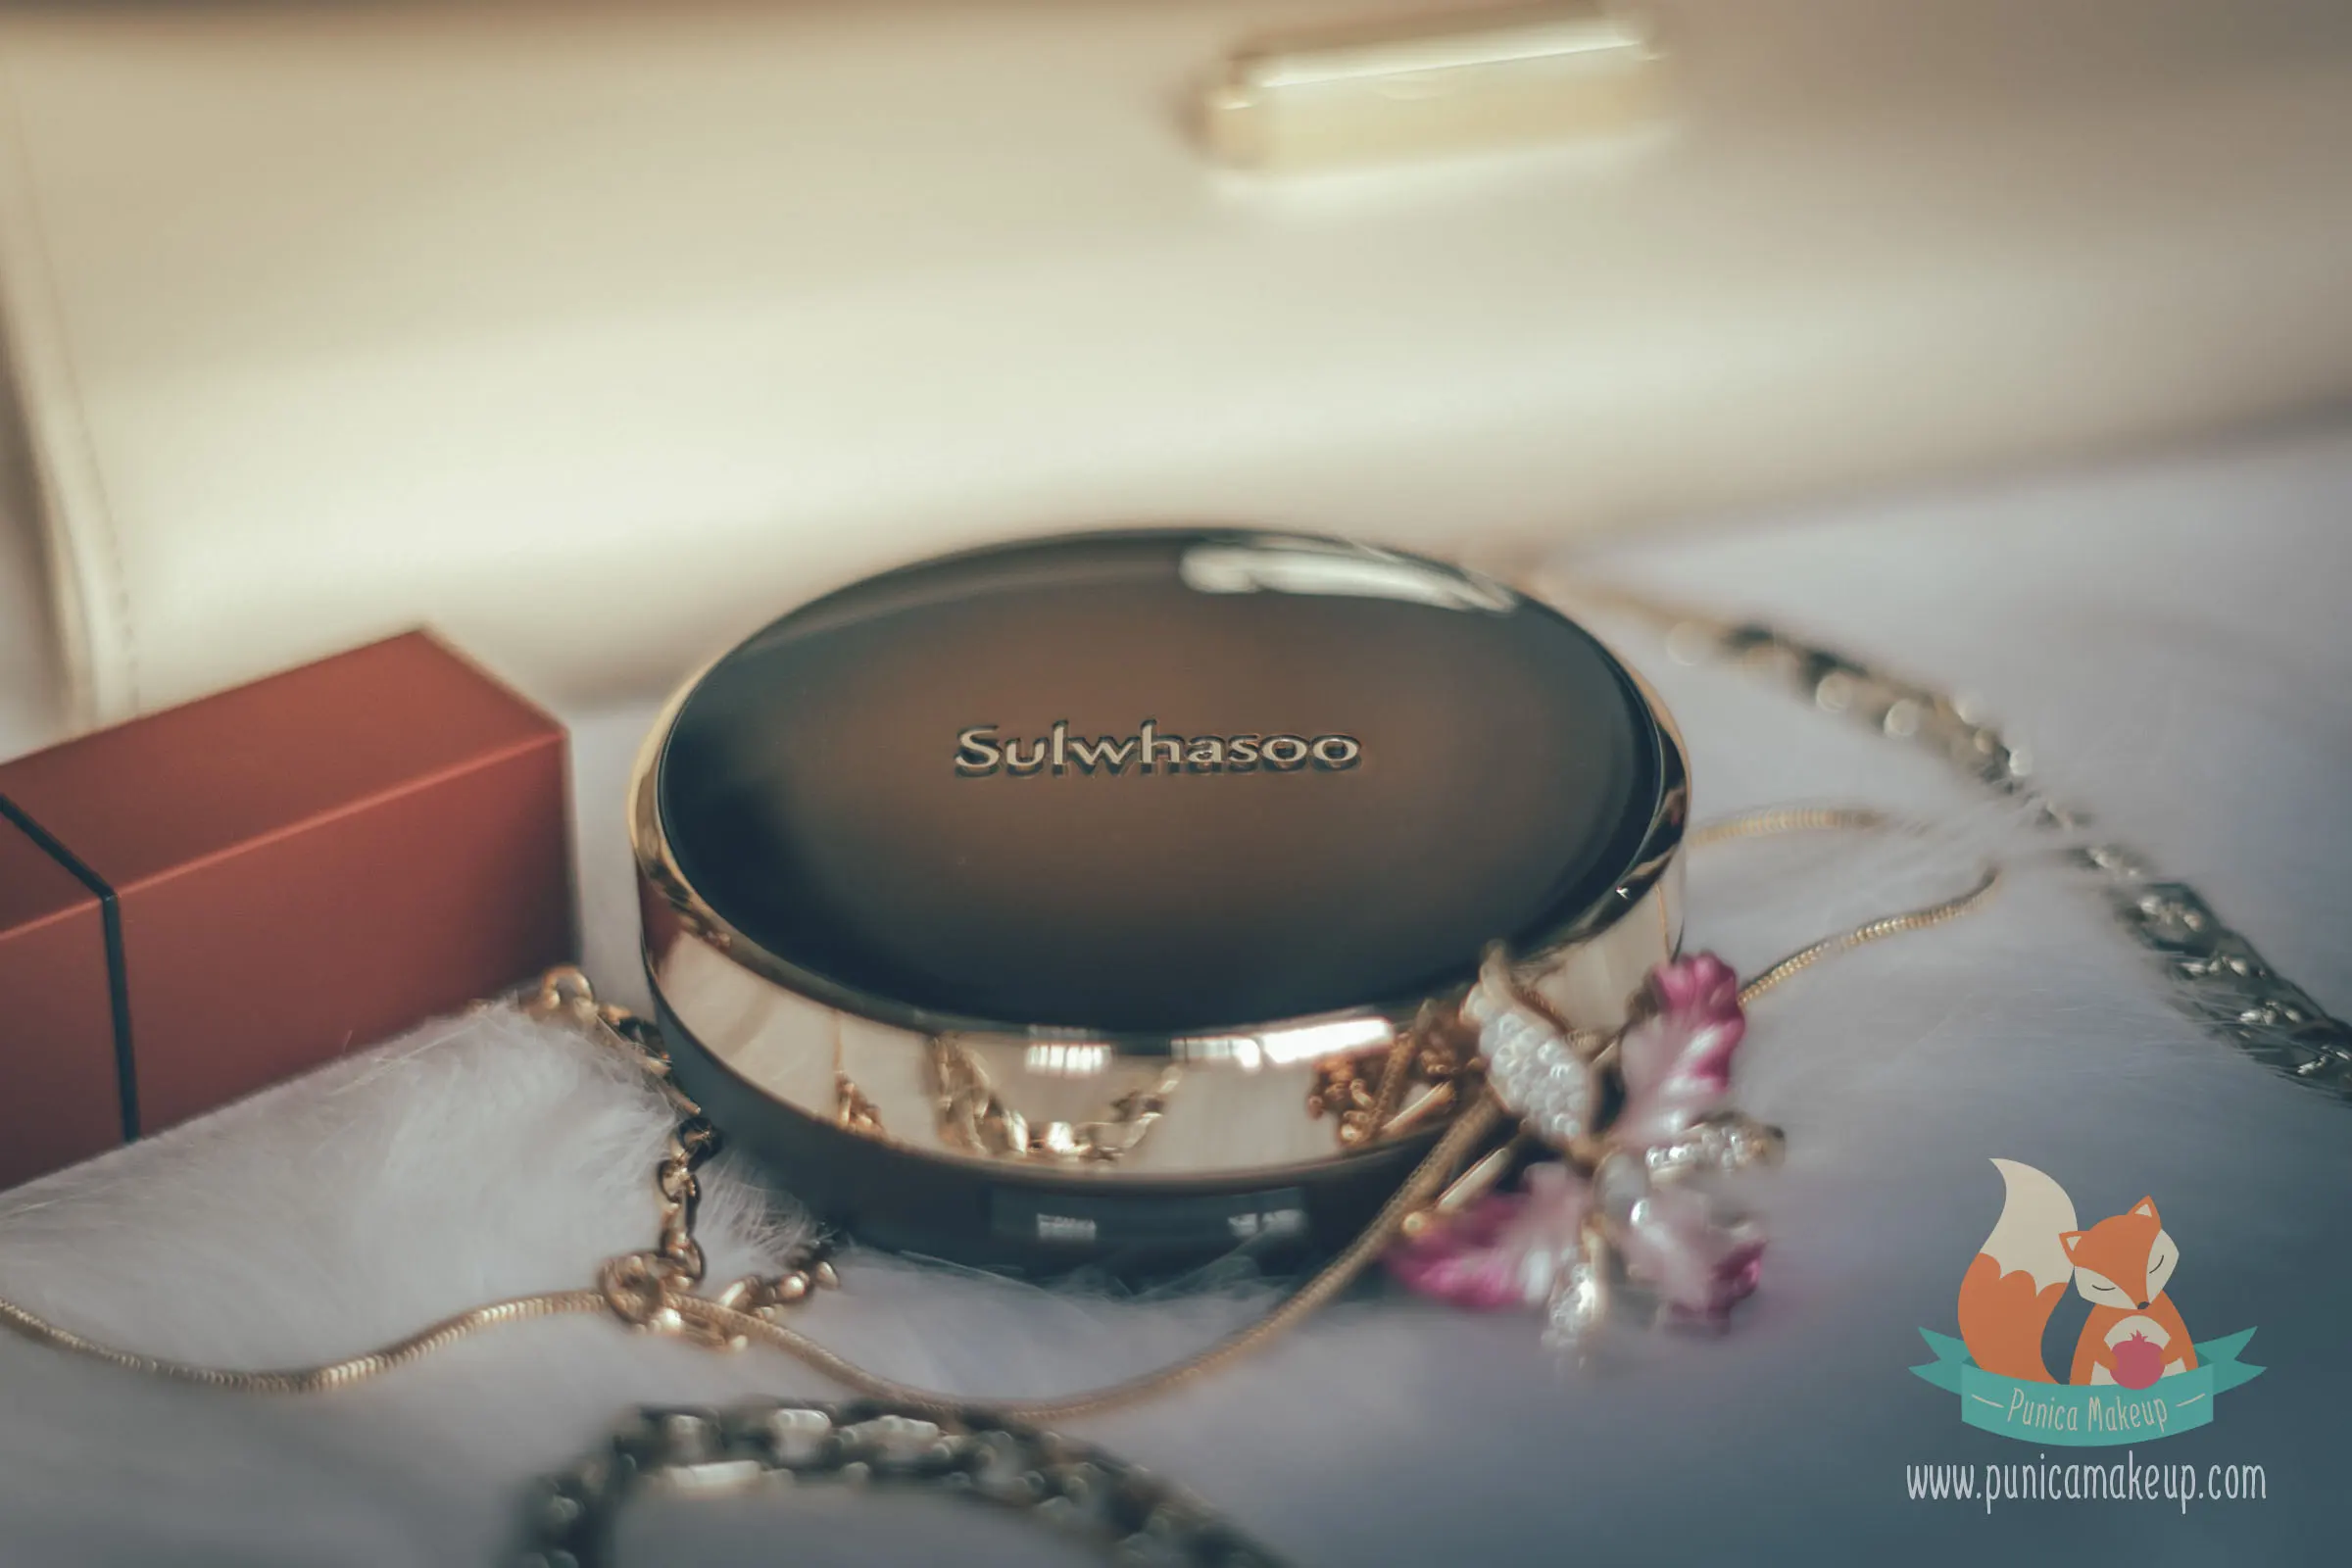 About Sulwhasoo Perfecting Cushion Intense